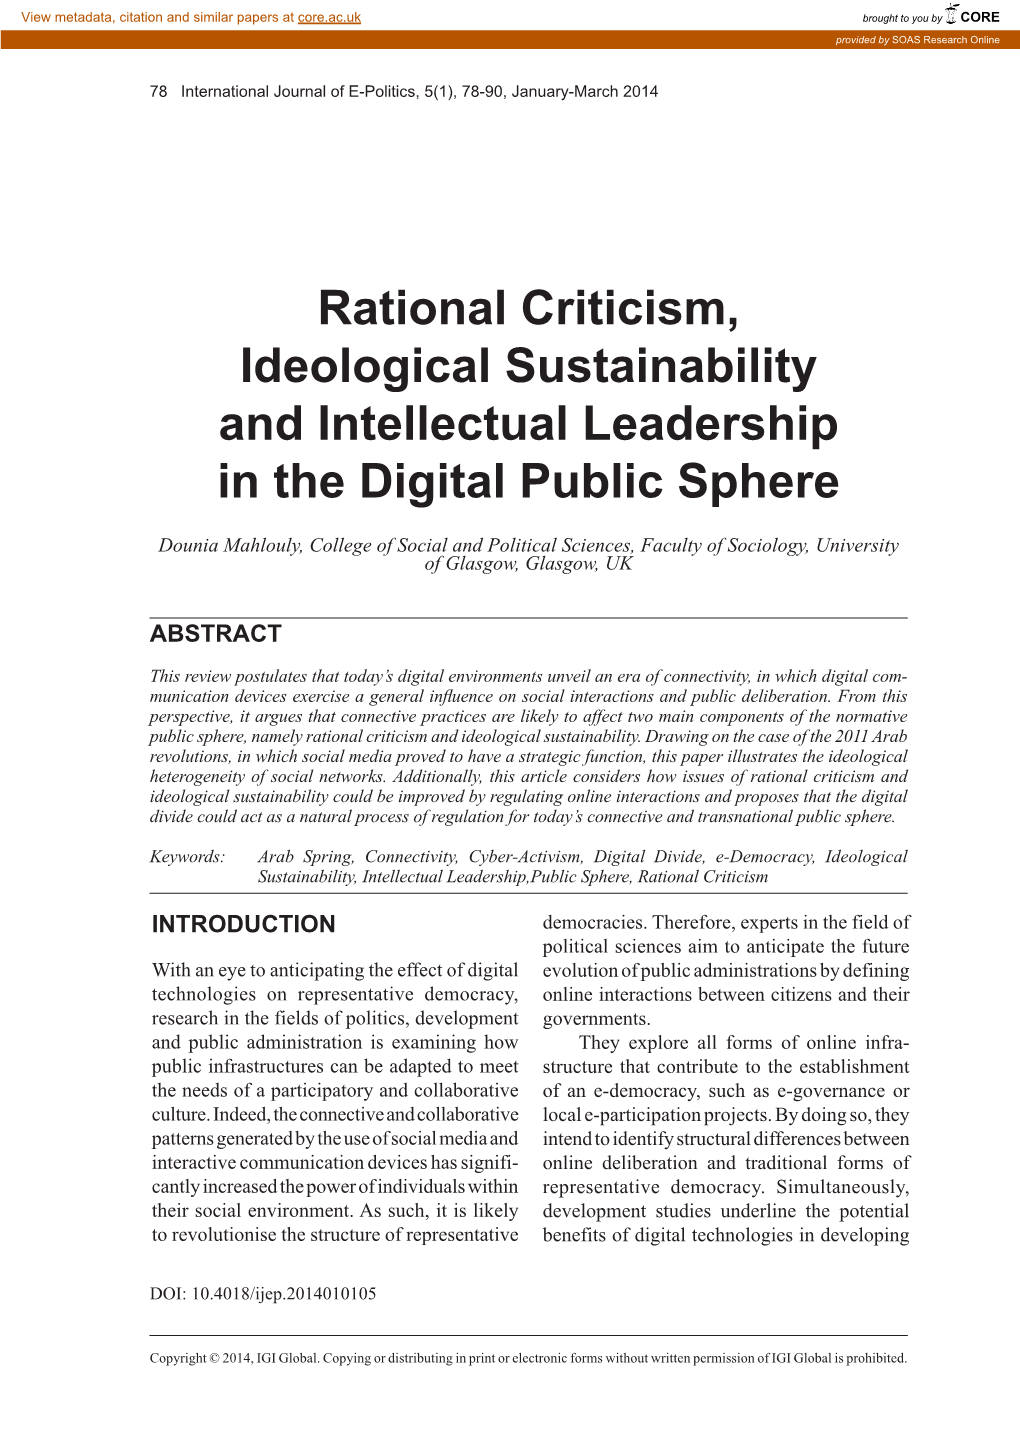 Rational Criticism, Ideological Sustainability and Intellectual Leadership in the Digital Public Sphere